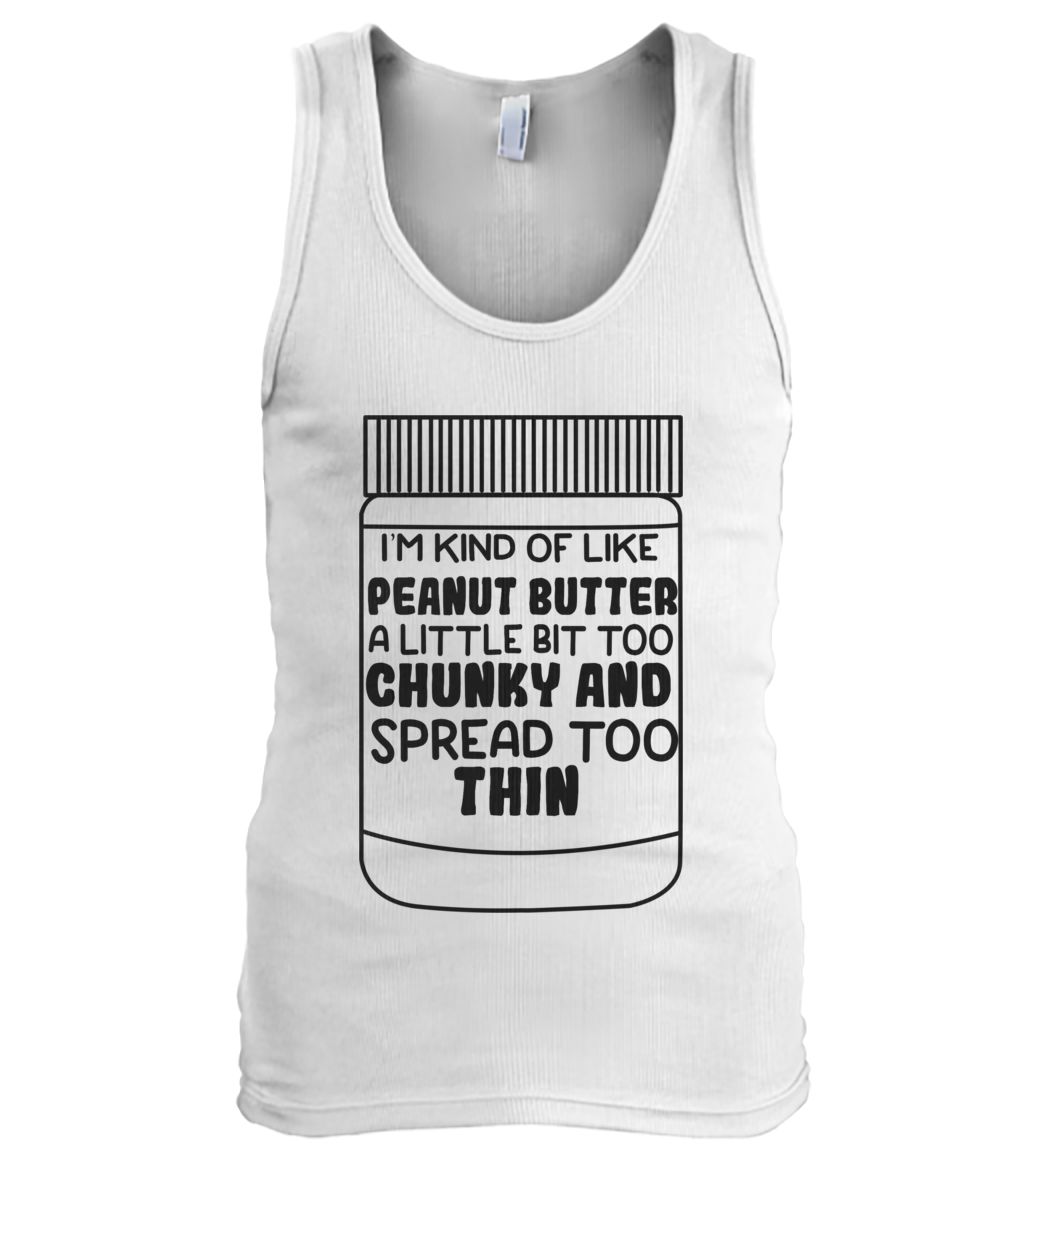 I'm kind of like peanut butter a little bit too chunky and spread too thin tank top